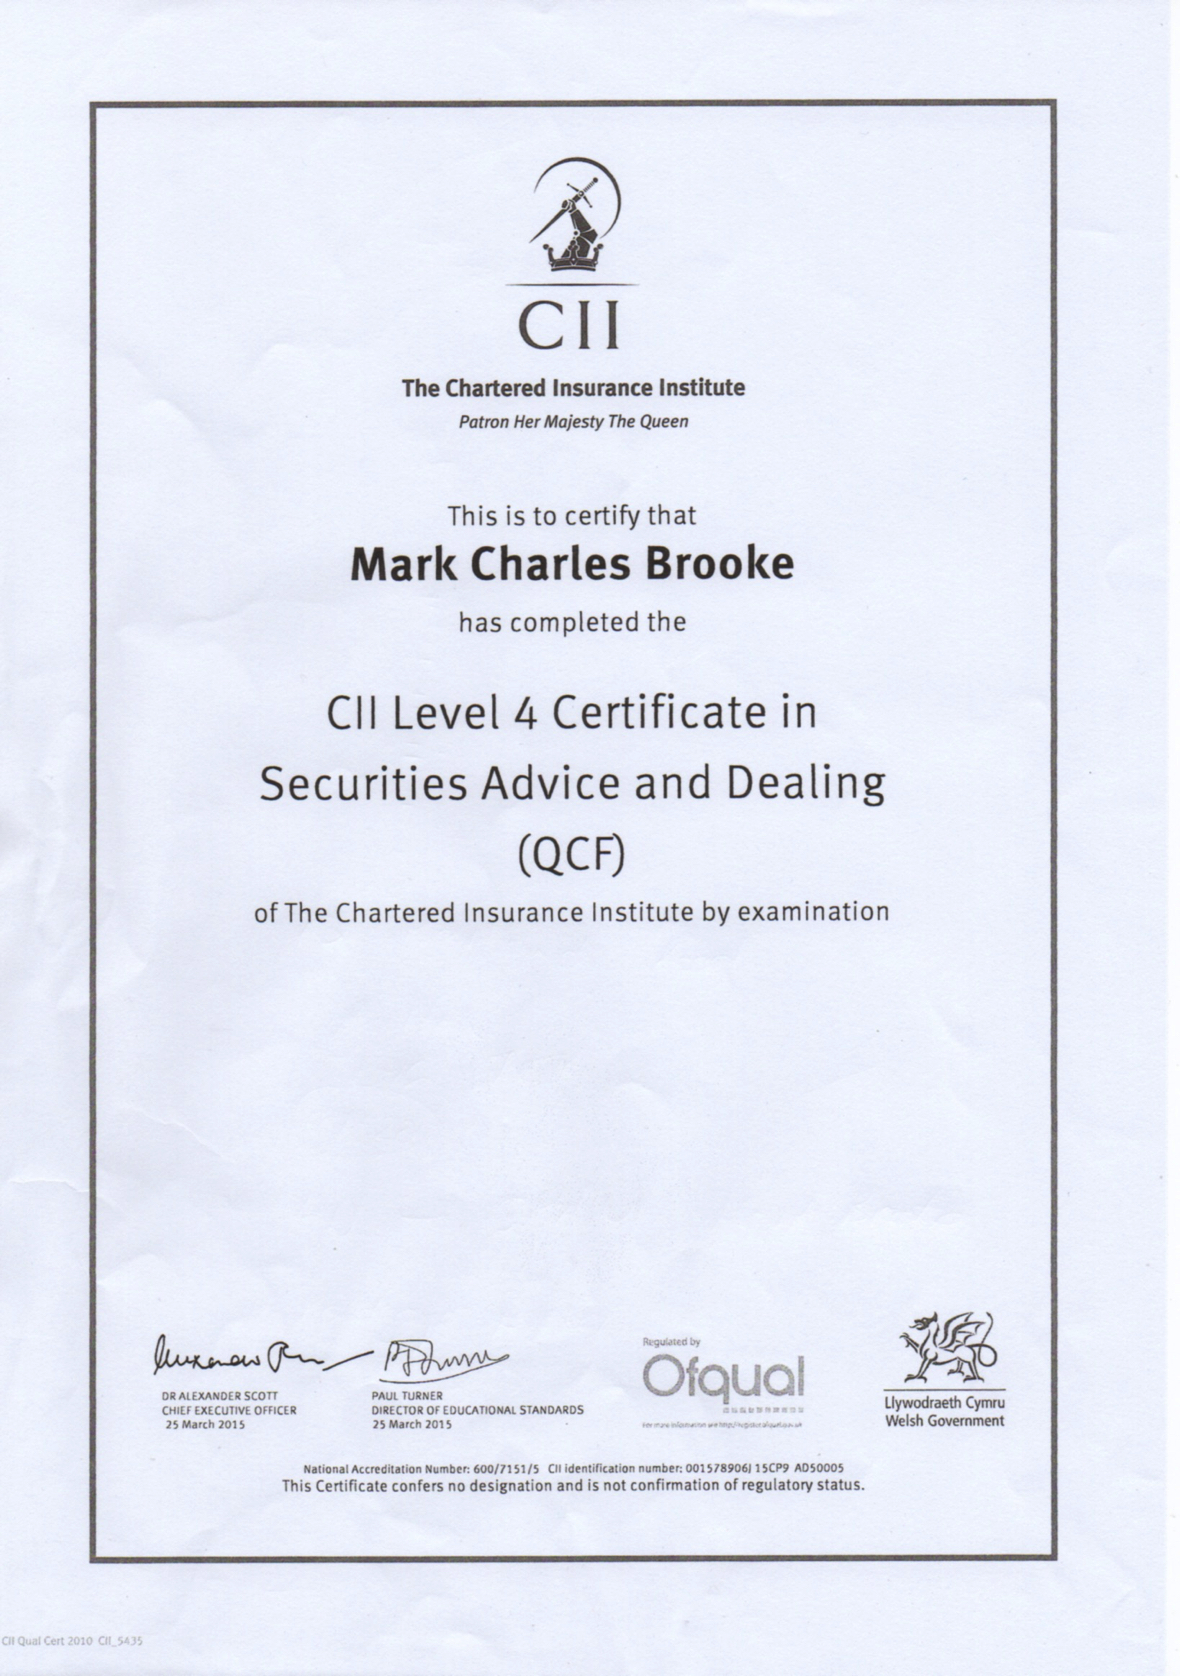 CII-Securites-Advice-and-Dealing-Level-4-QCF-for-Mark-Brooke-2016-09-09